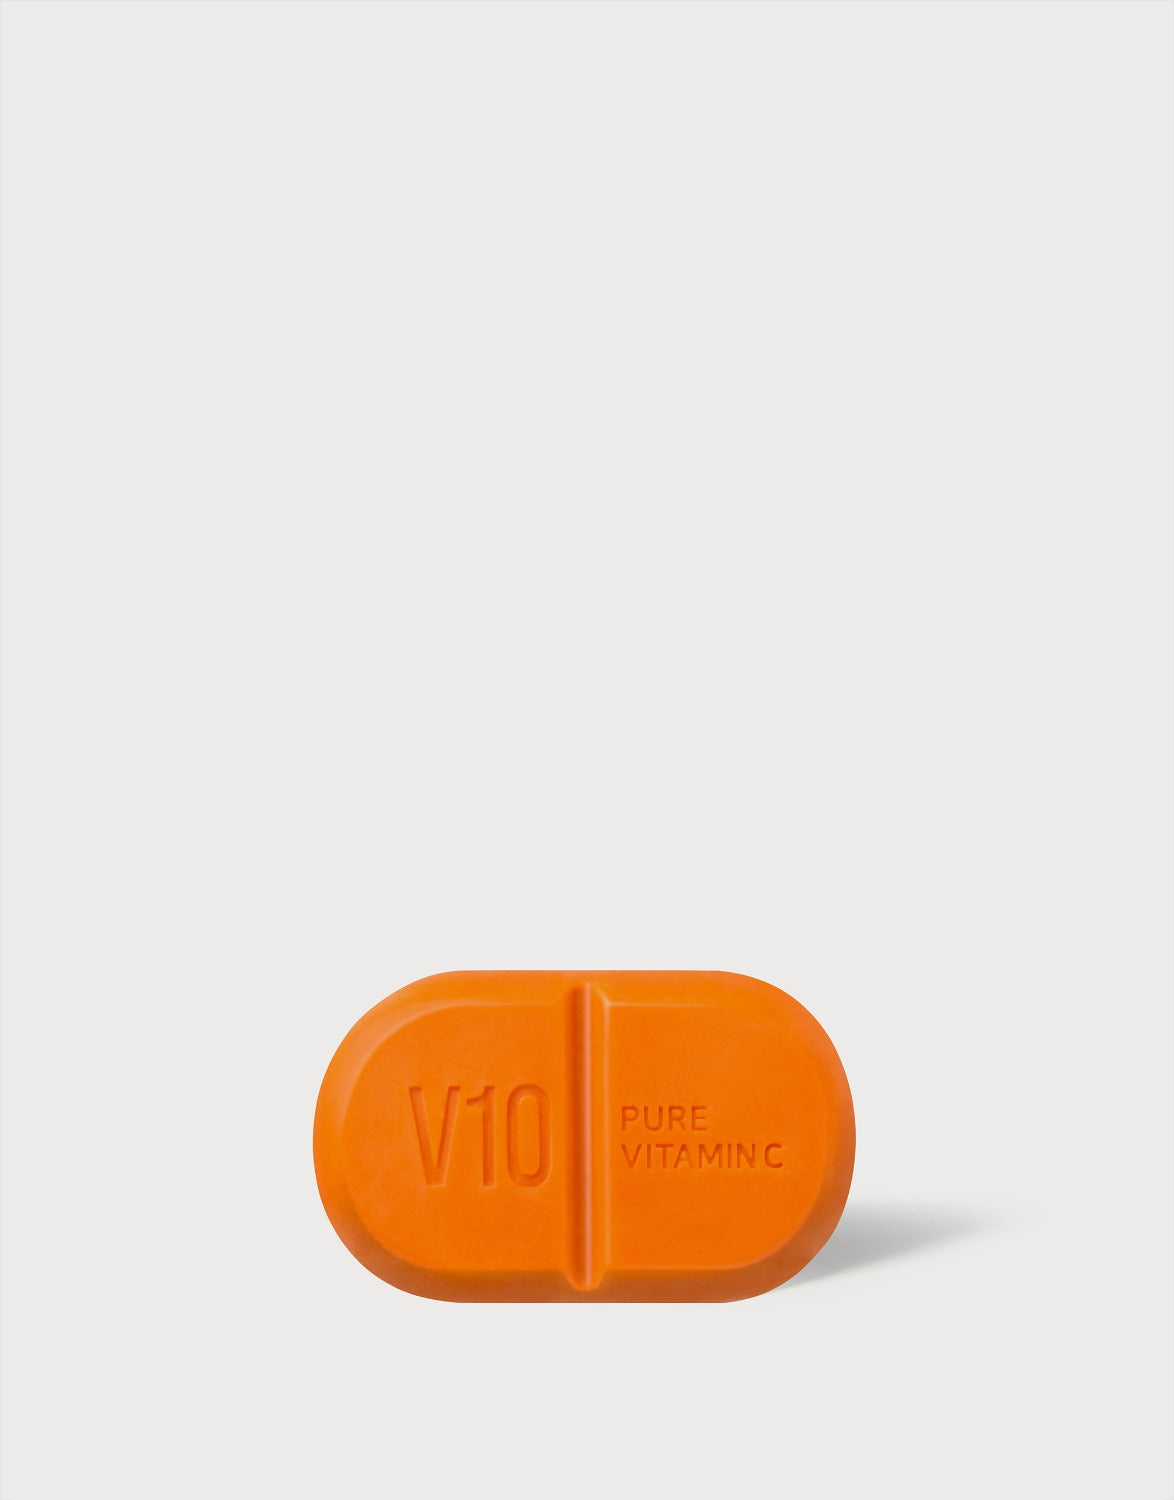 [Some By Mi] Pure Vitamin C V10 Cleansing Bar